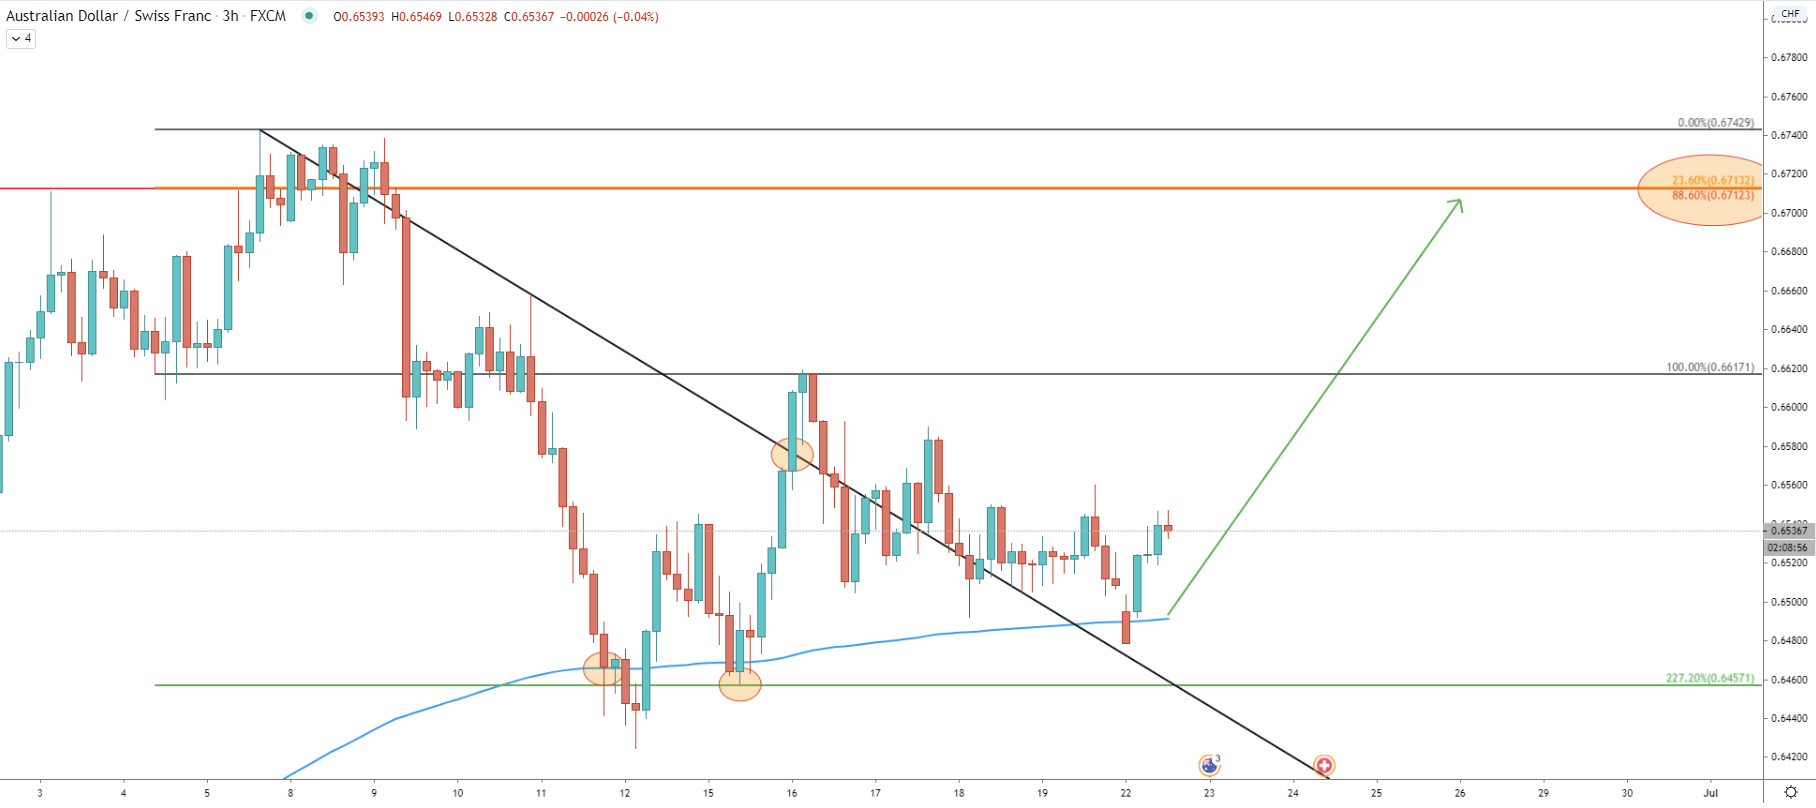 AUD/CHF 3-Hour Technical Analysis 22 June 2020